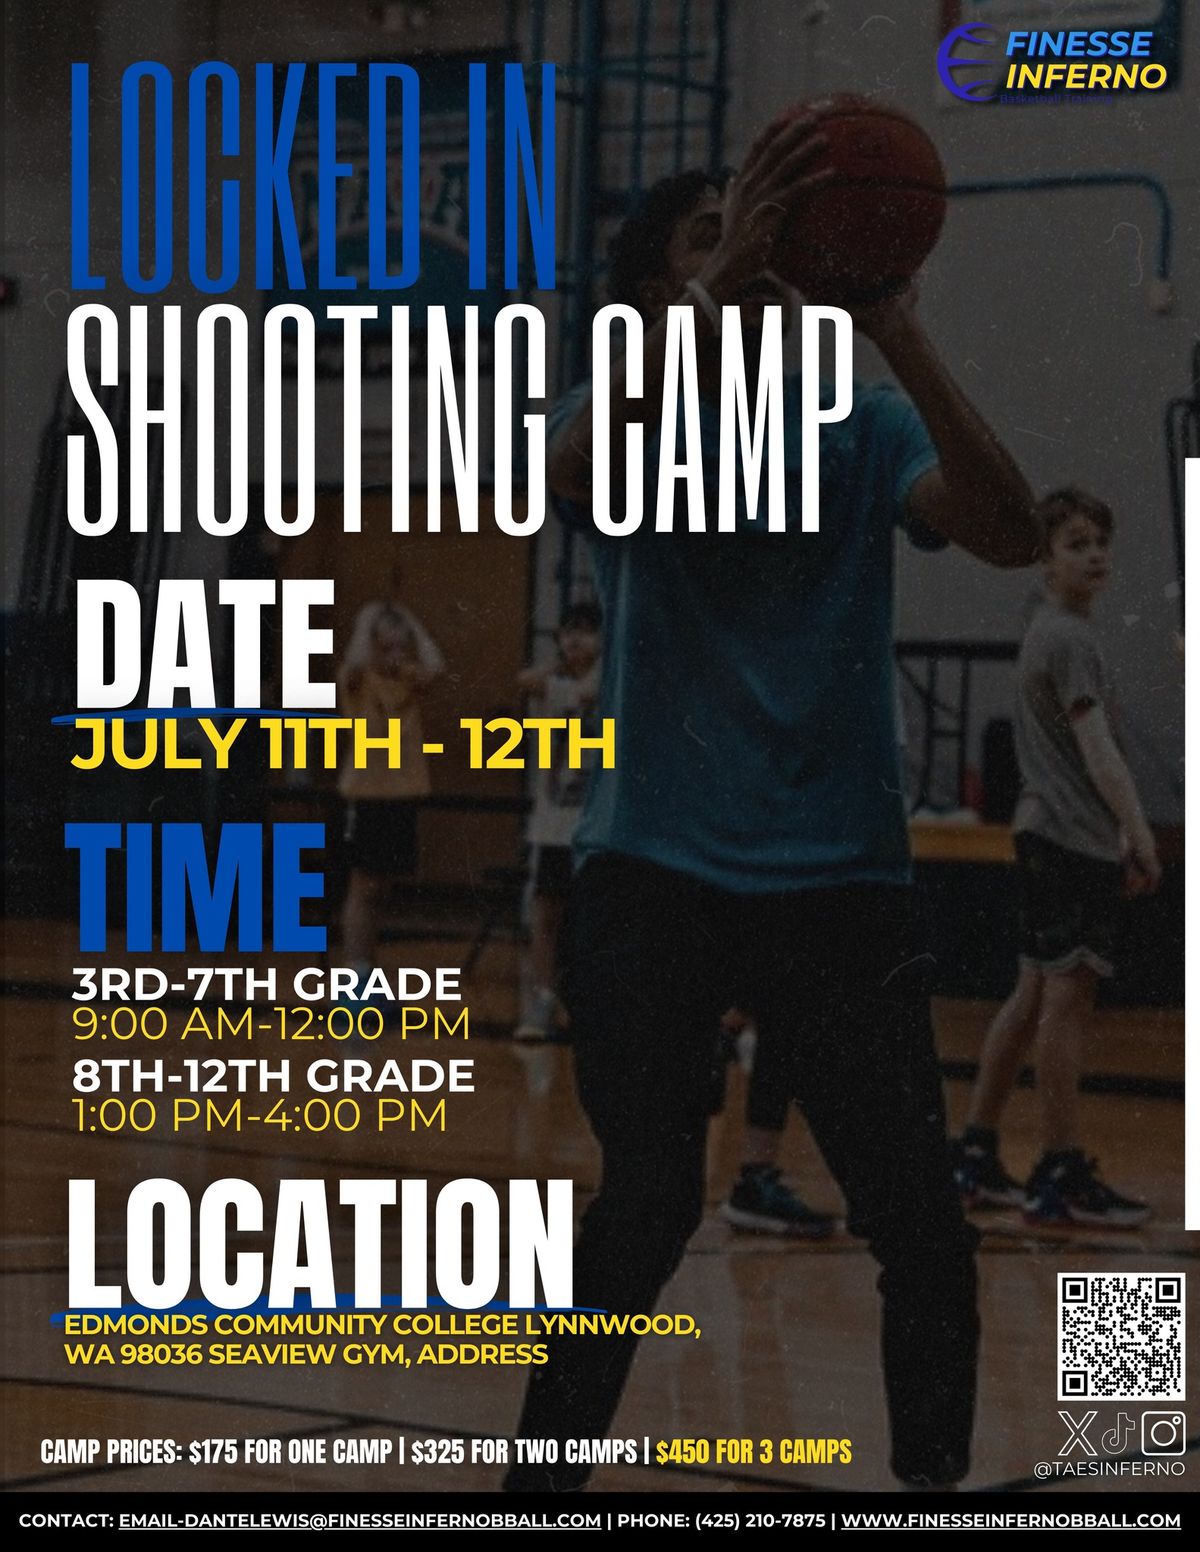 Locked In Shooting Camp 3rd-7th grade